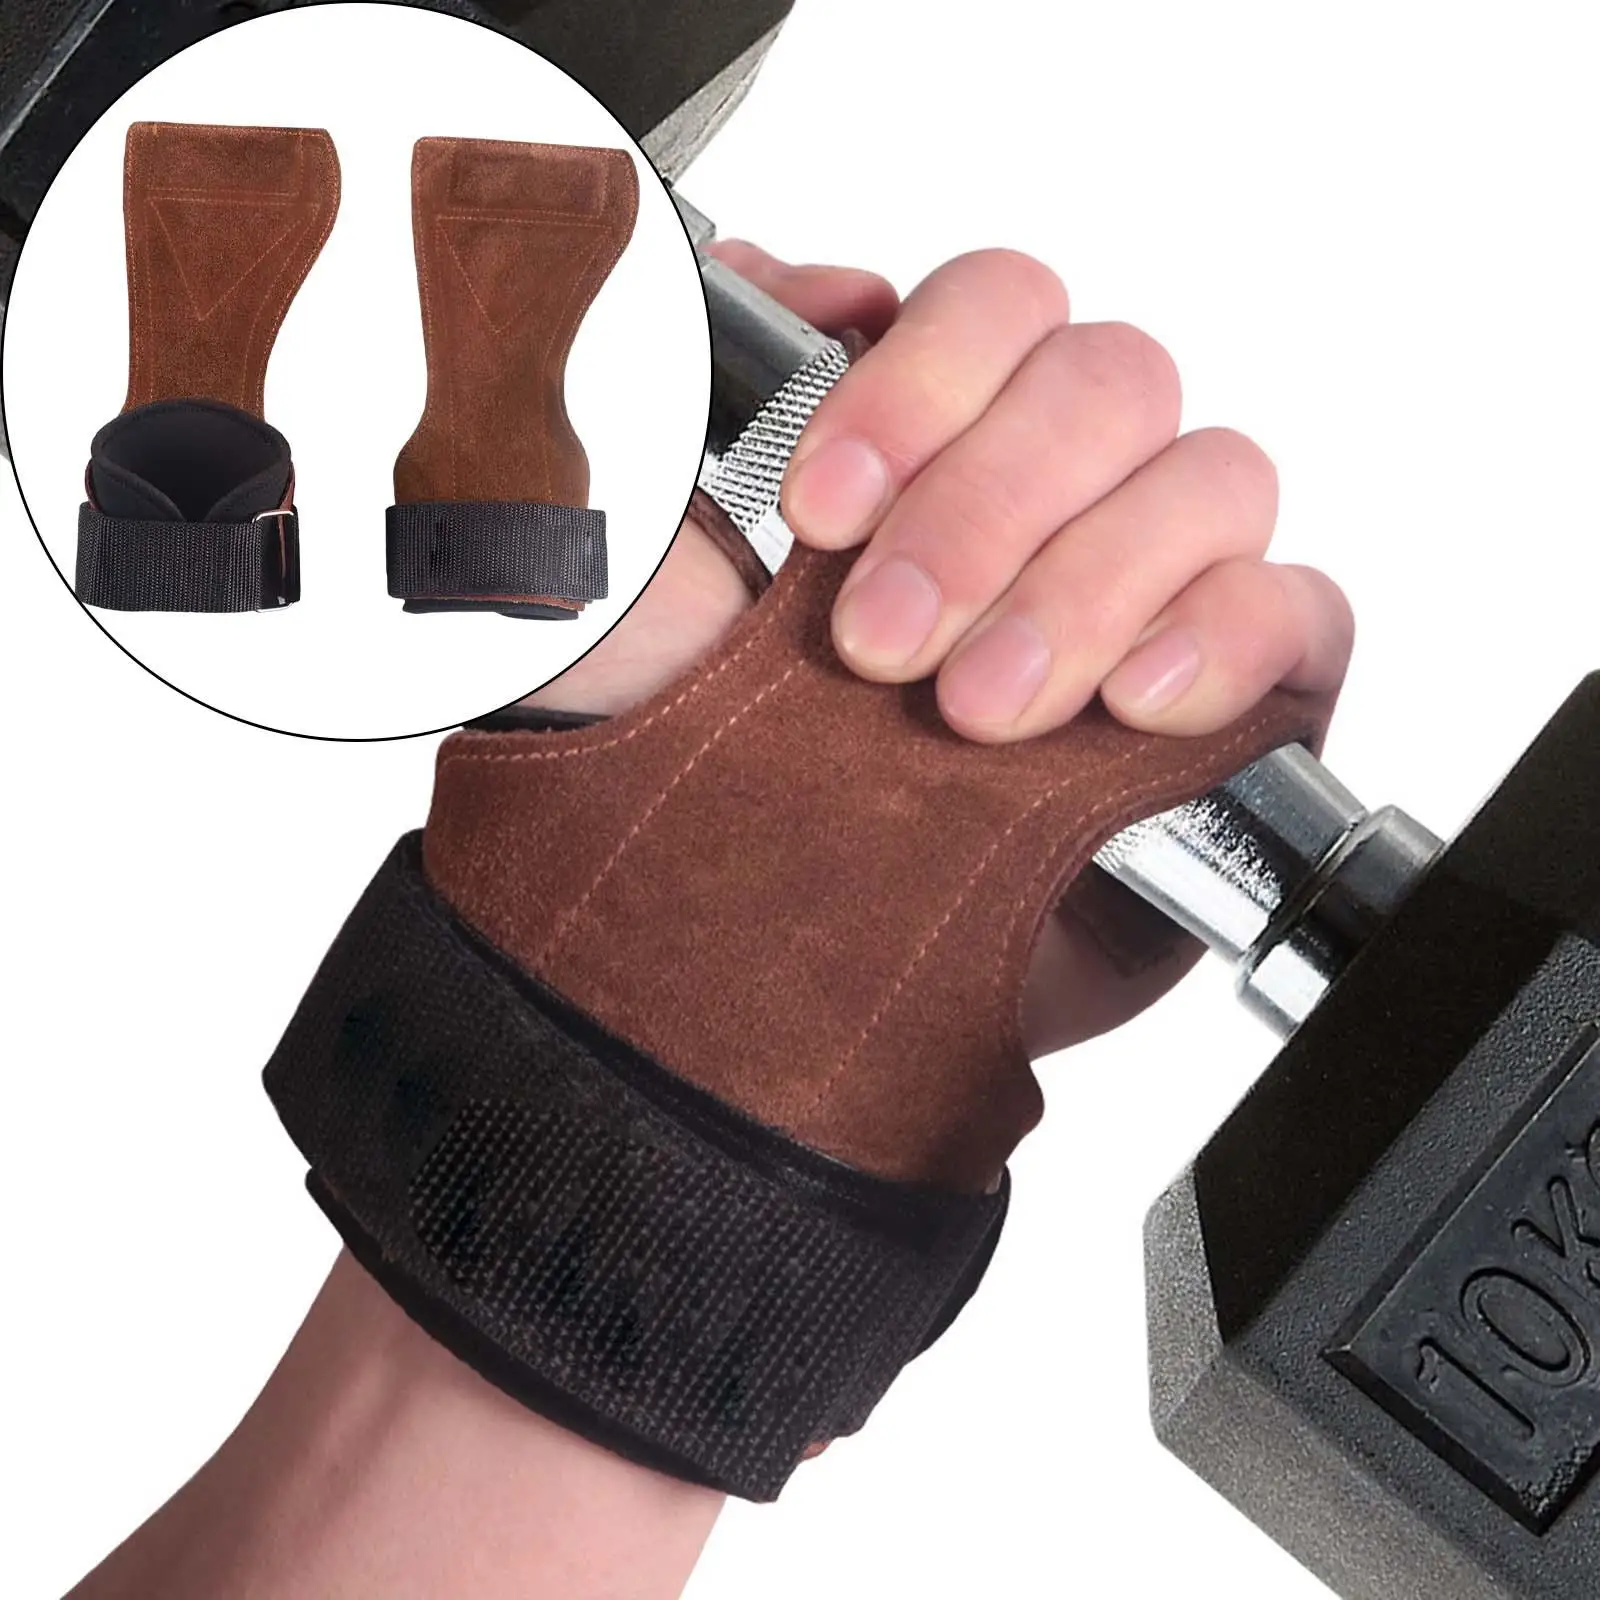  Weightlifting Hand Grips for Men and Women Leather Palm Grip, Anti Slip Weightlifting Gloves for Deadlifting Powerlifting Gym